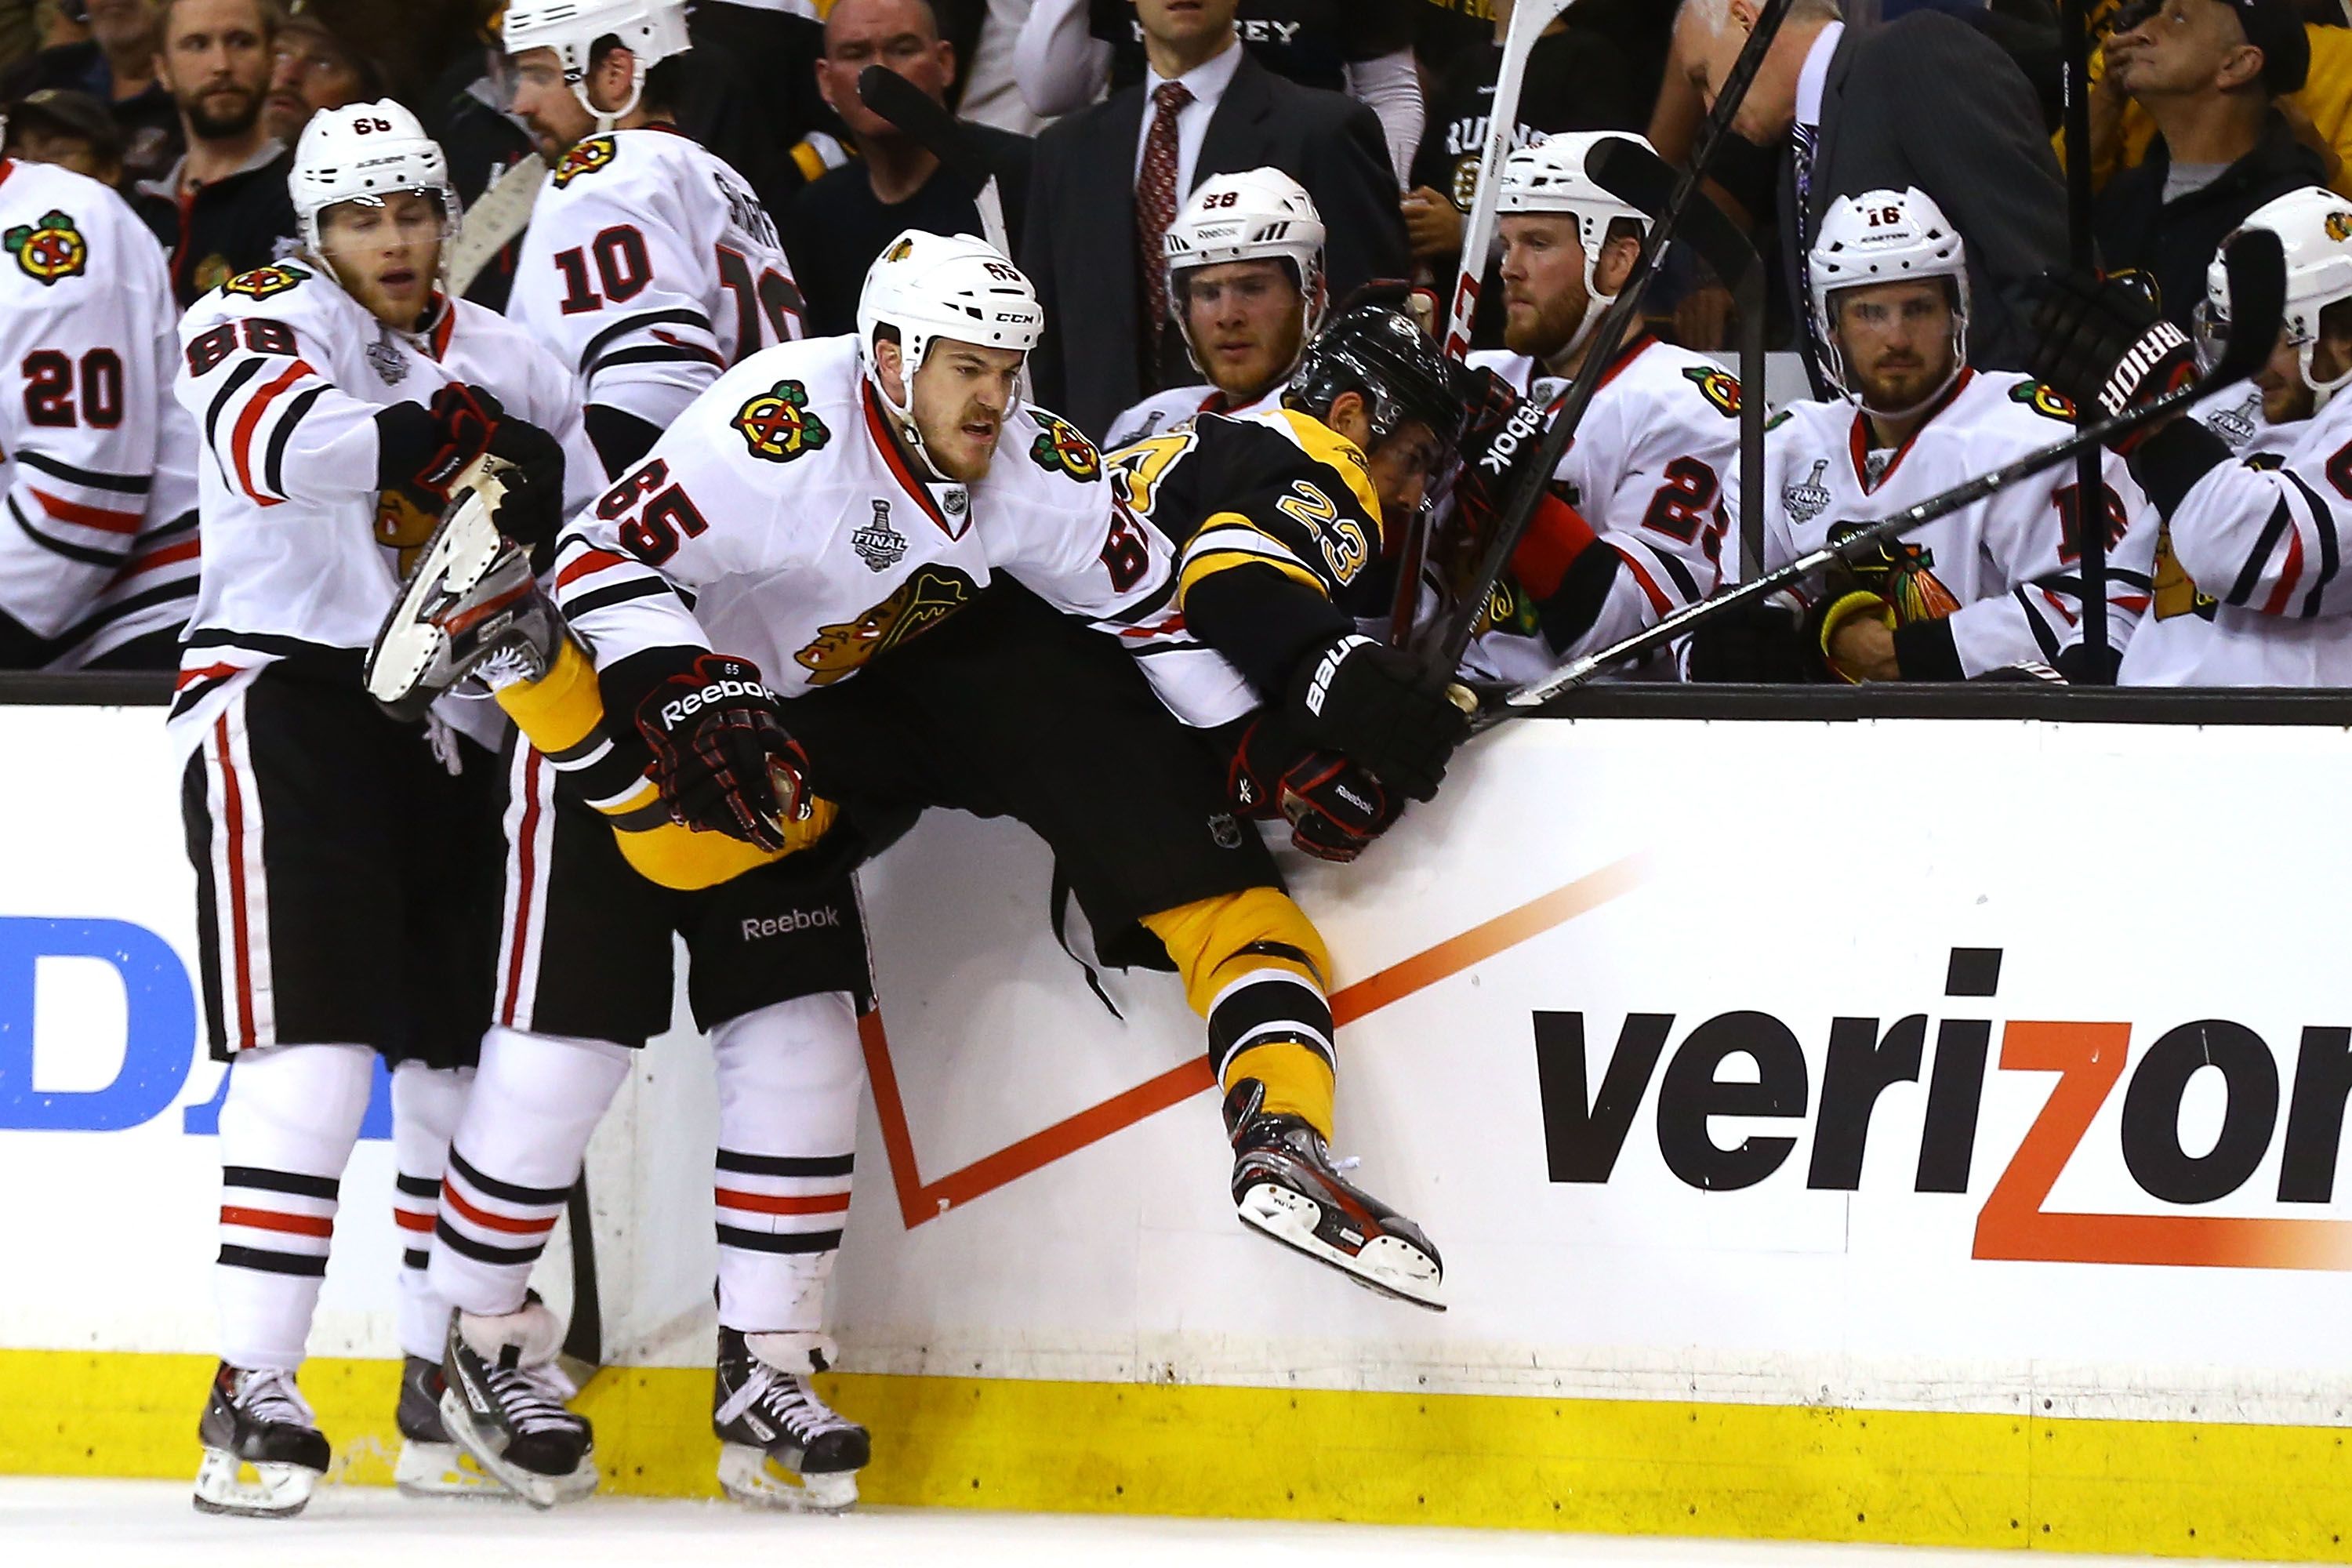 2013 Stanley Cup Finals: Most Up-to-Date Encyclopedia, News & Reviews